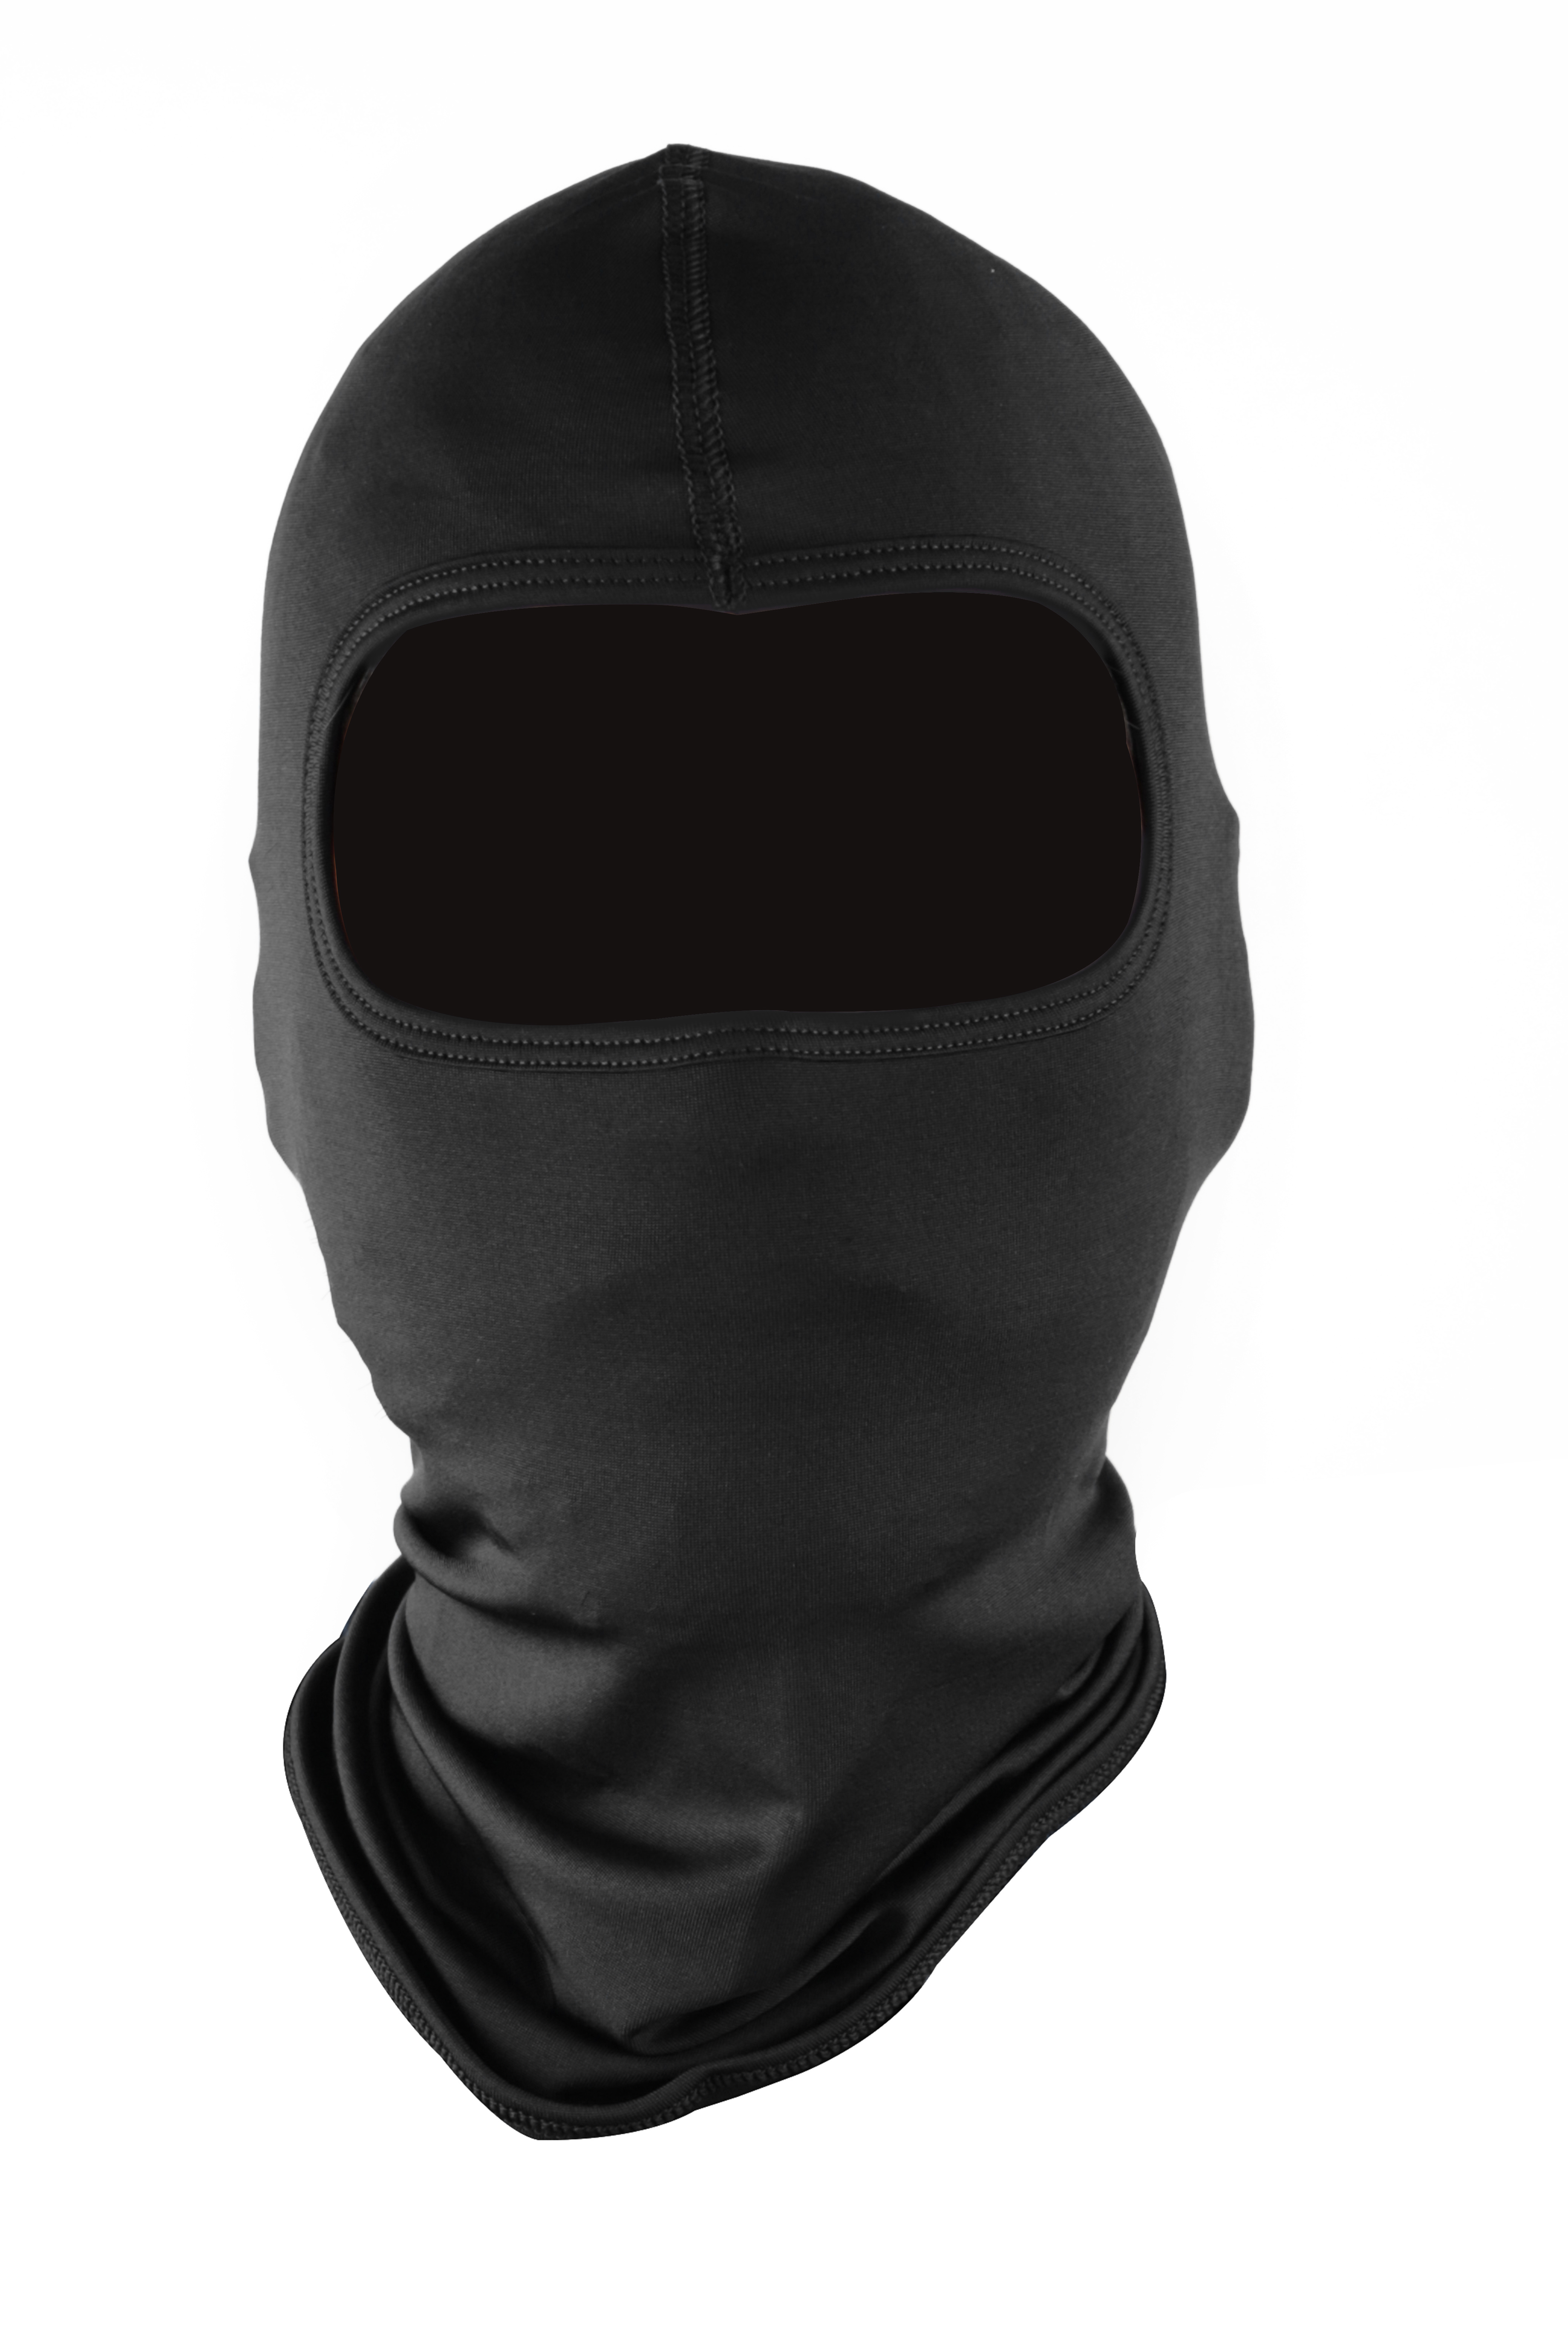 Steelbird Soft Lycra Balaclava Most Suitable For Motorcycling, Running, Sports, Head And Face Cover (Black)